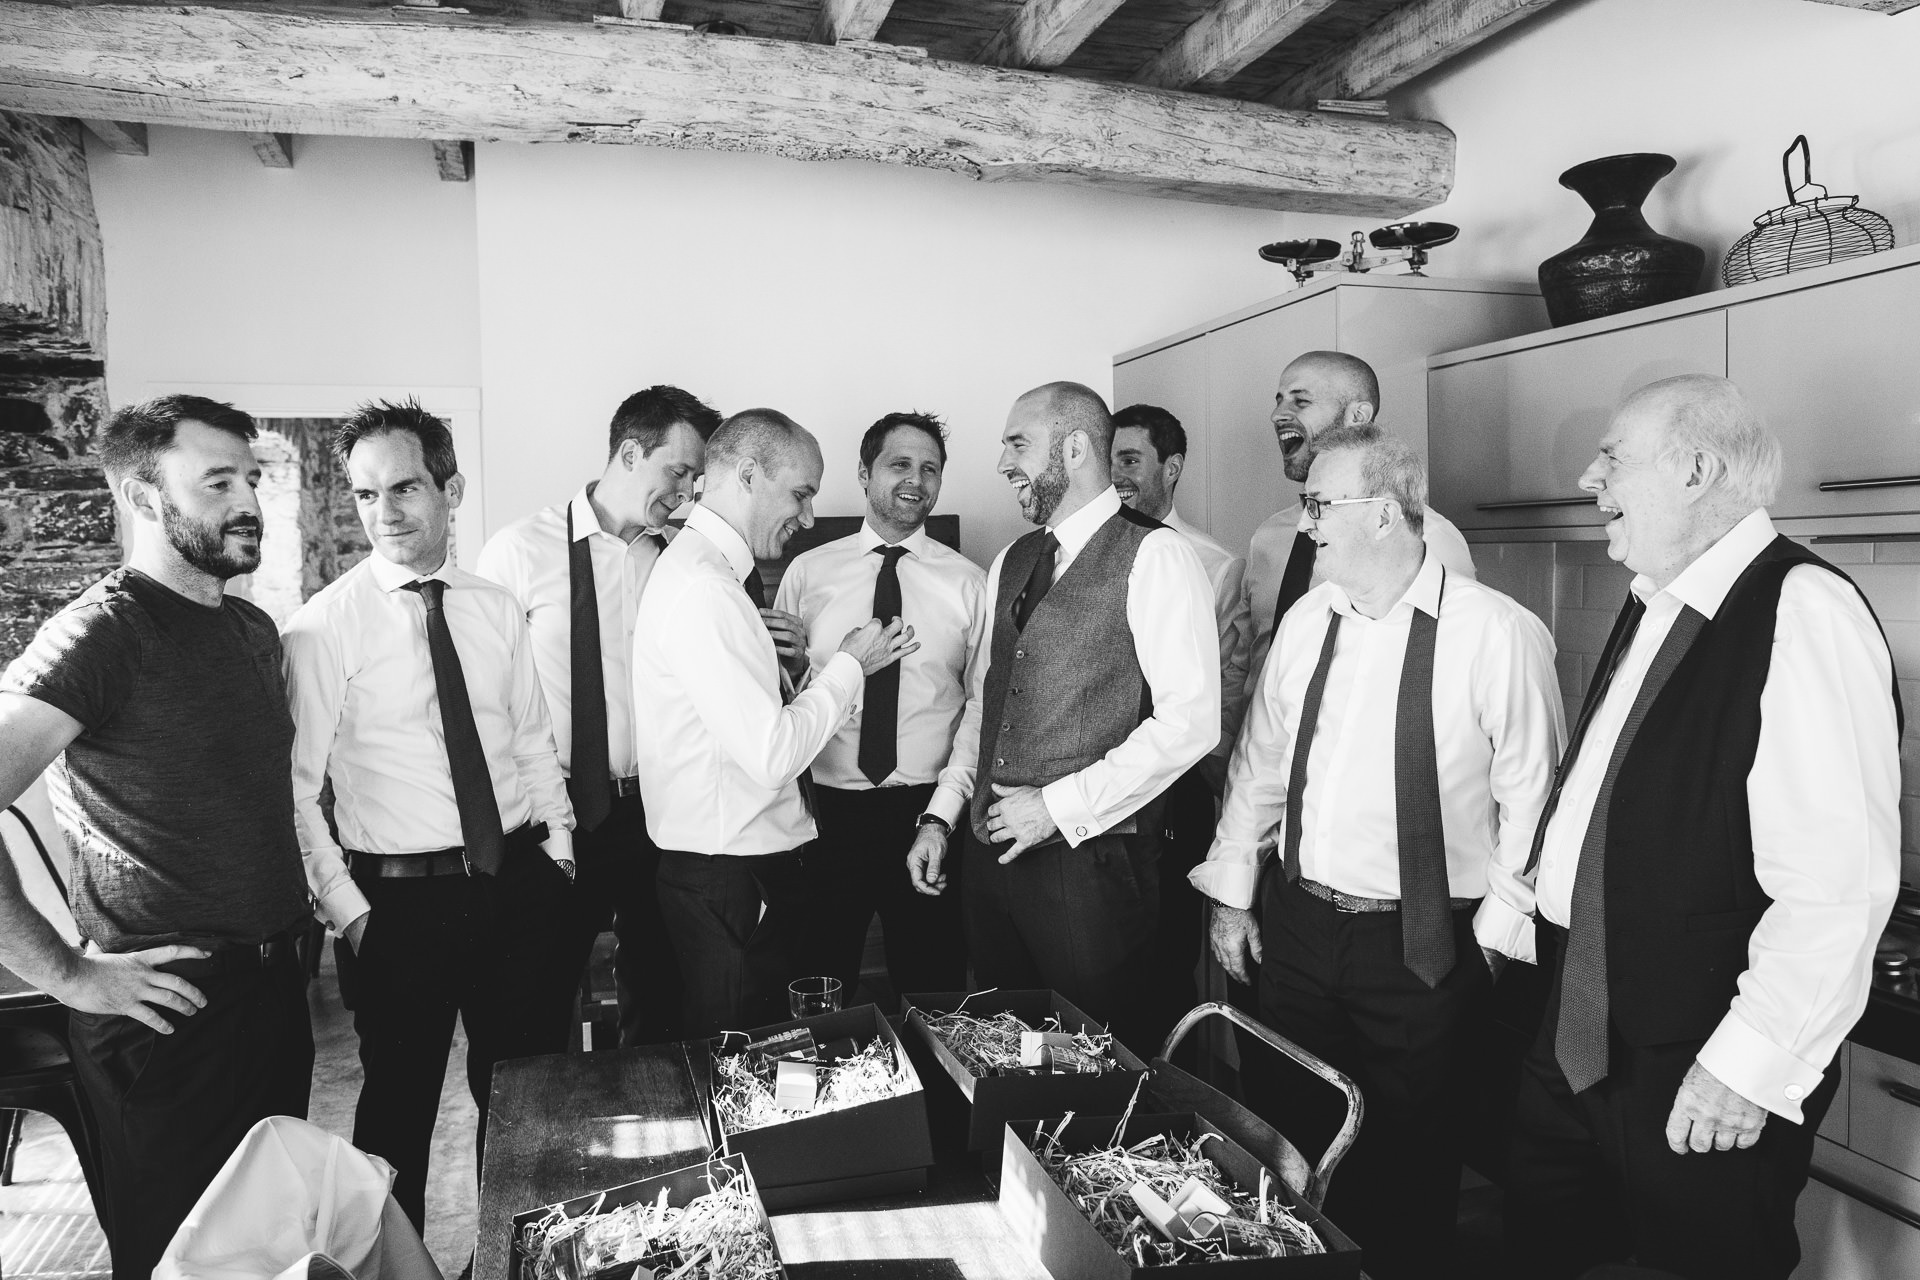 Groom and groomsmen laughing together